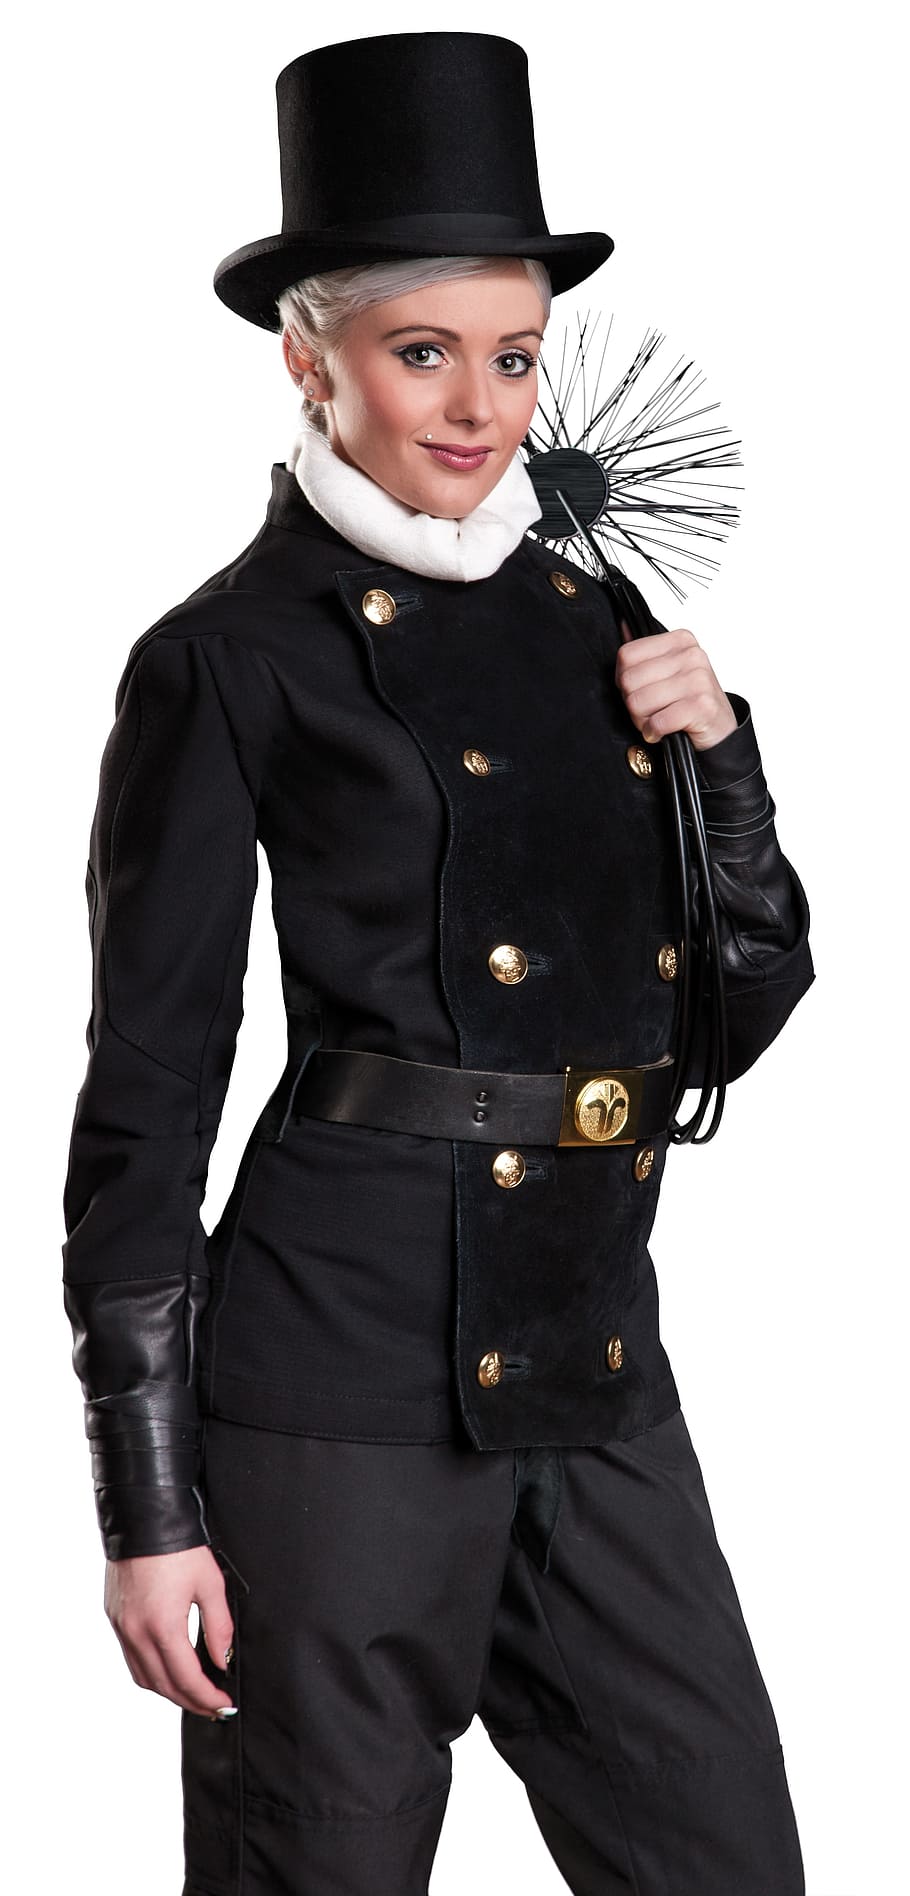 woman, holding, black, leather whip, chimney sweep, girl, clothing, studio shot, white background, front view